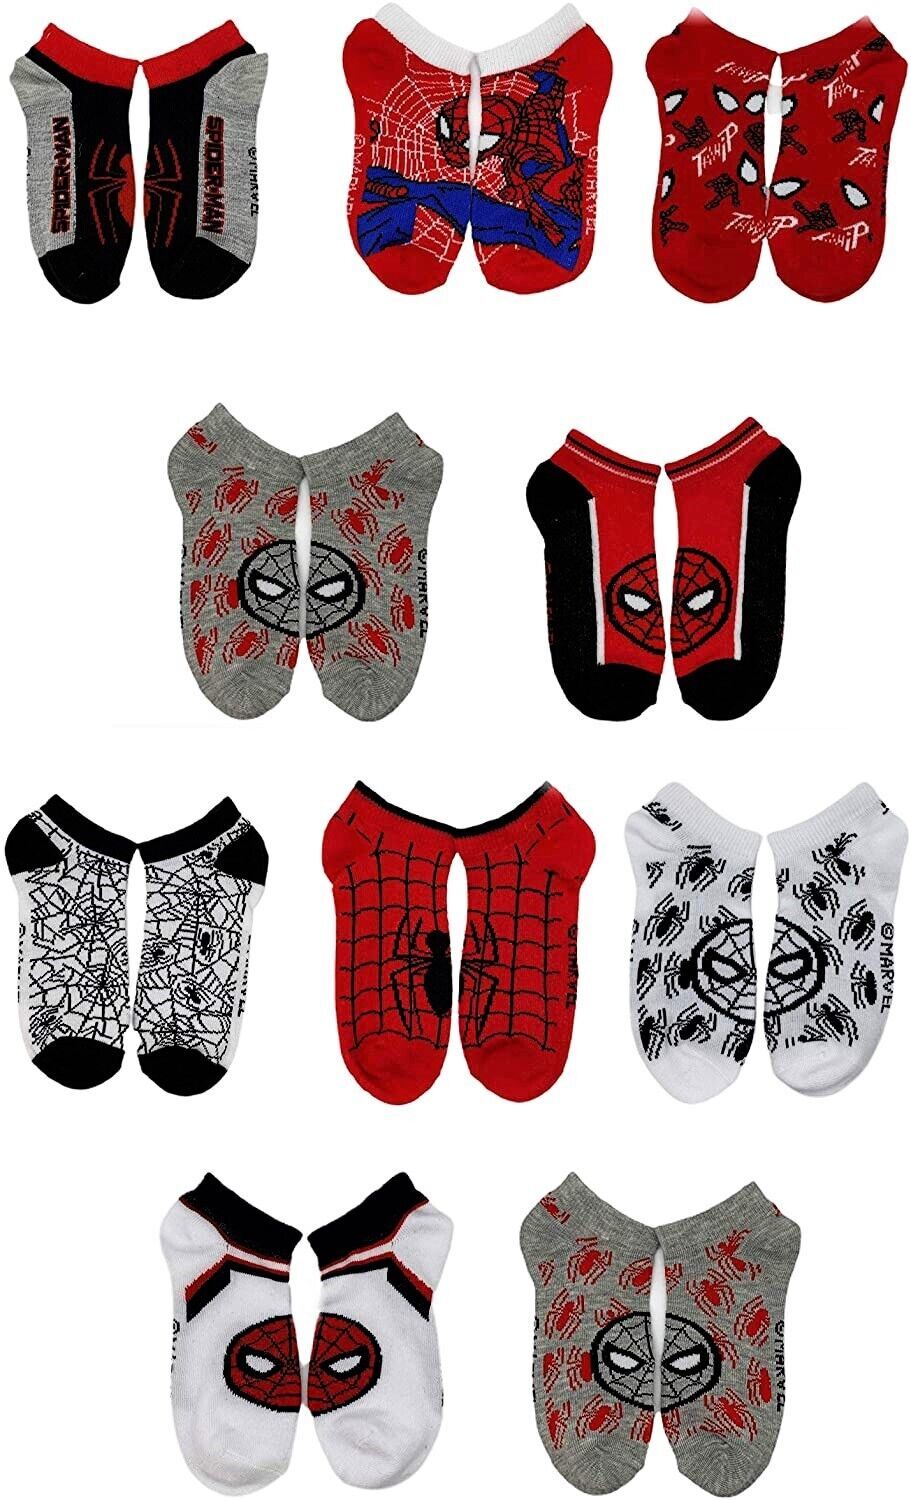 SPIDER-MAN MARVEL COMICS 5 or 10-Pack Low Cut No Show Socks Kids Ages 3-8 NWT - $10.72 - $16.10